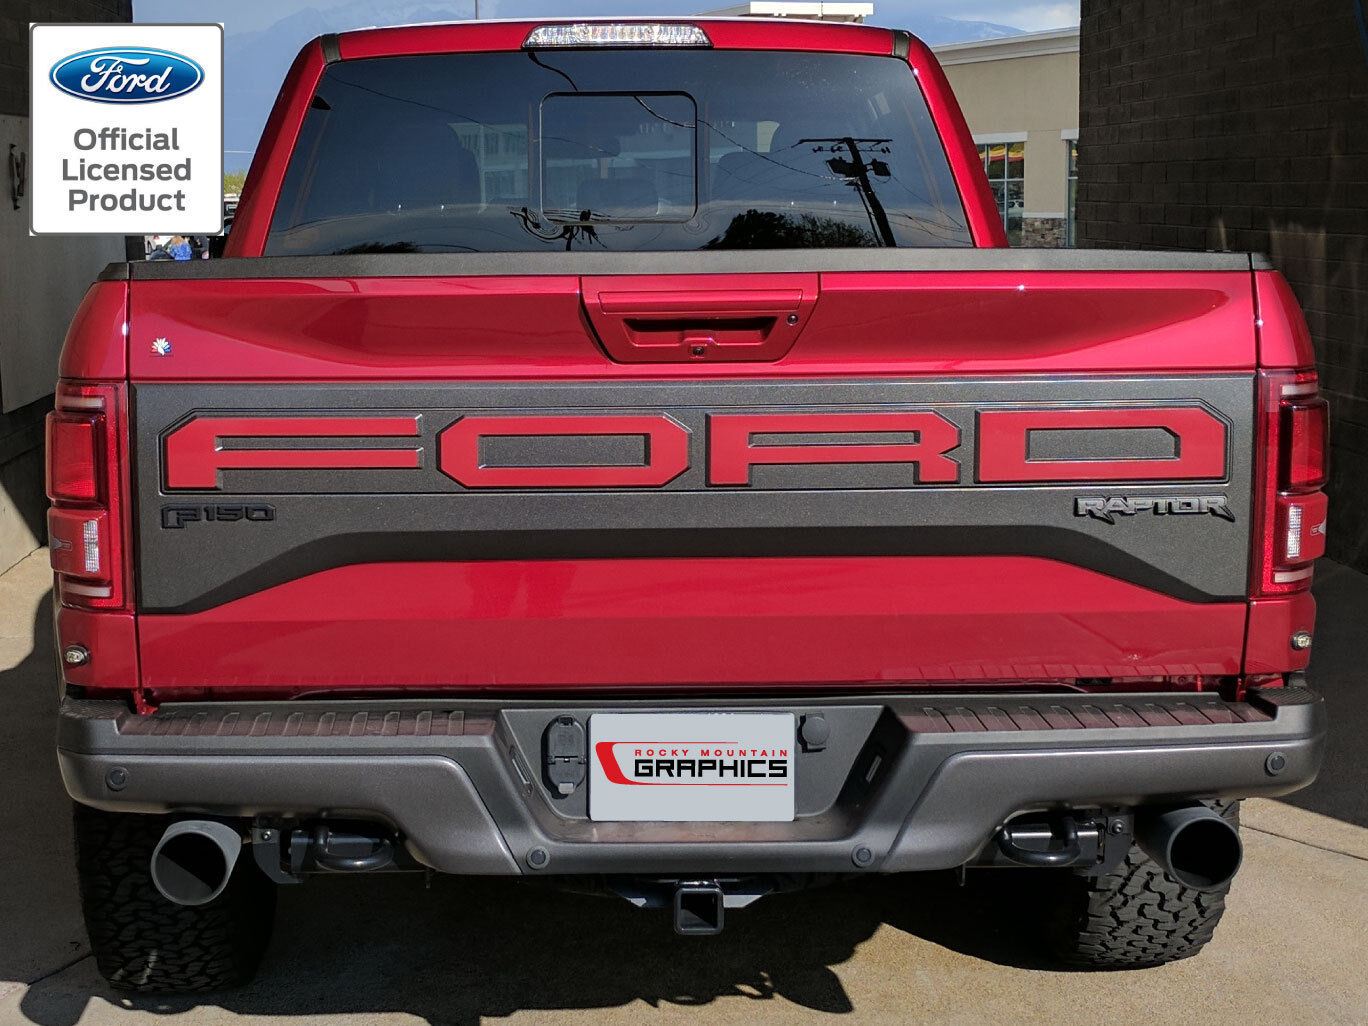 New Ford Raptor Svt F-150 Tailgate Letters Vinyl Stickers Decals 60+ Colors 2017